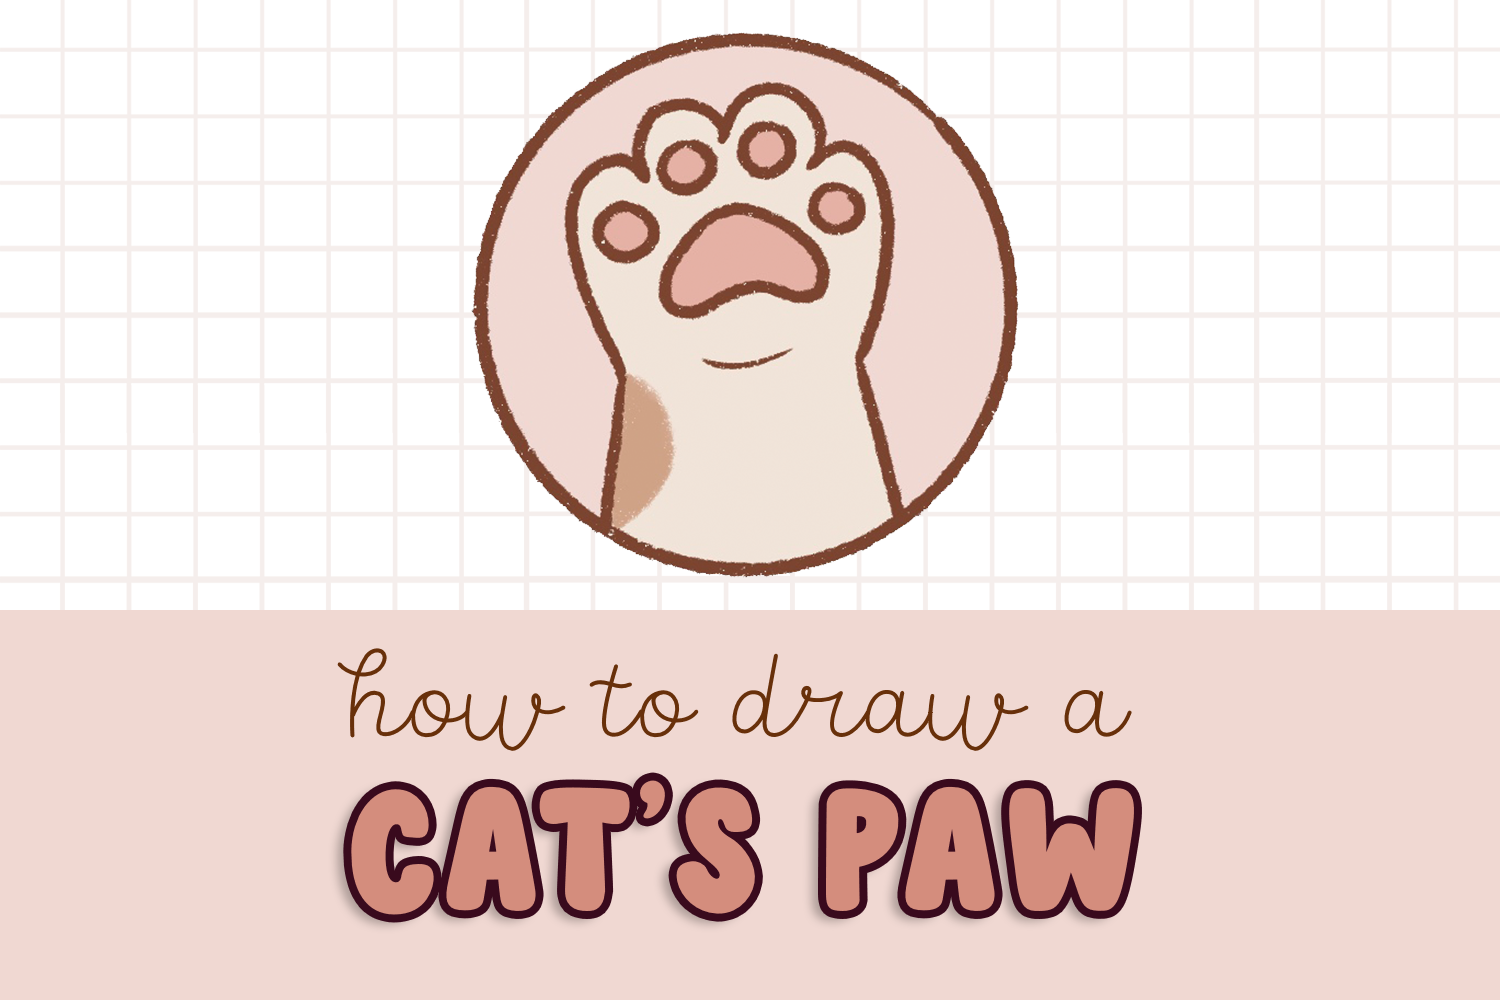 How to Draw a Cute Cat Paw (Easy Beginner Guide)